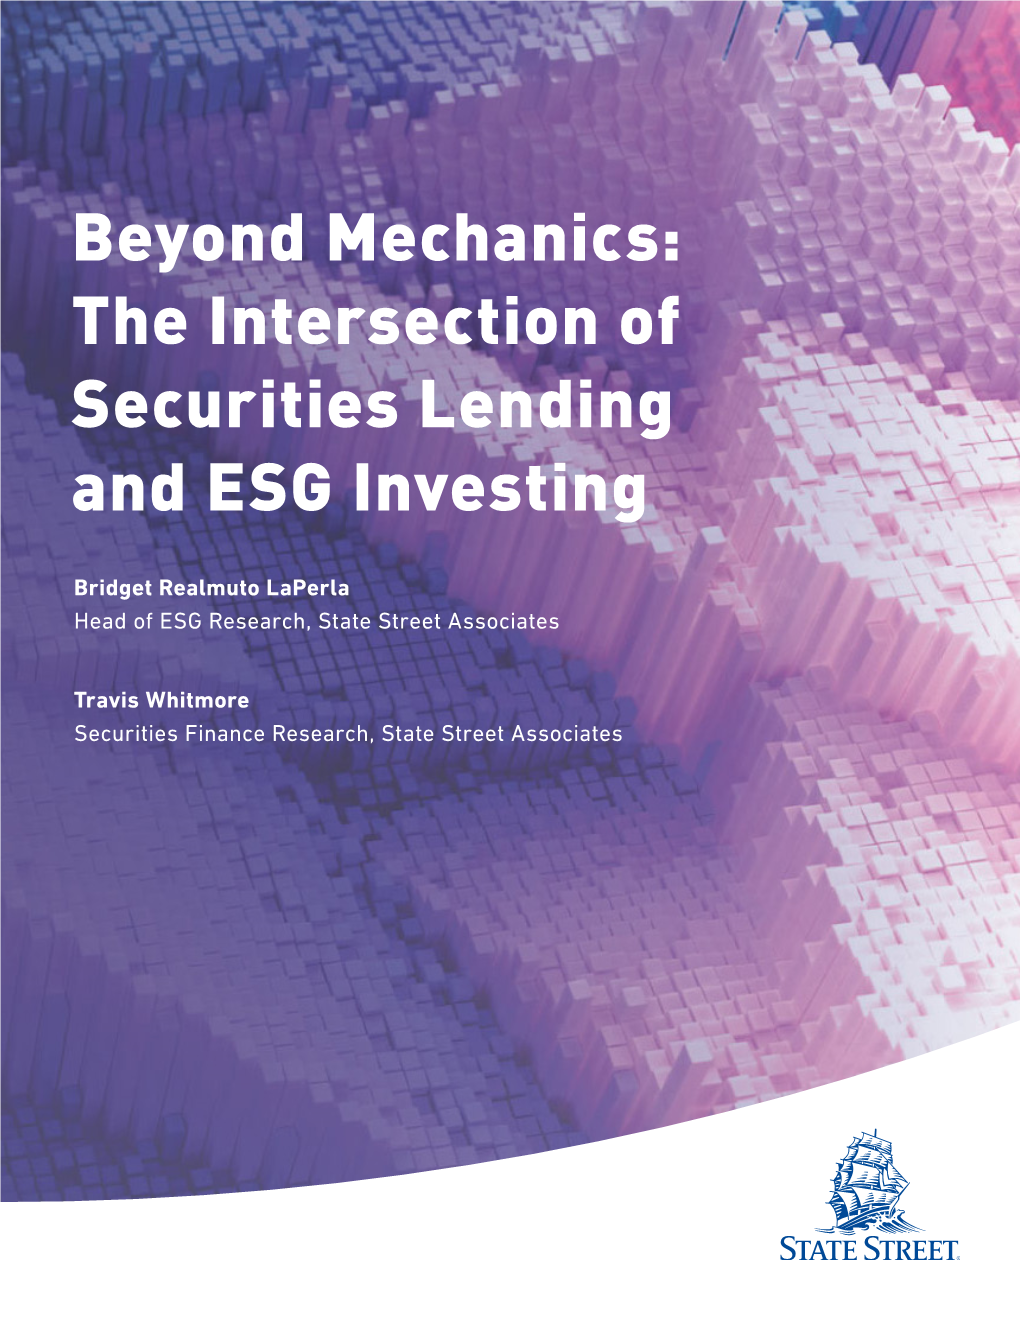 Beyond Mechanics: the Intersection of Securities Lending and ESG Investing